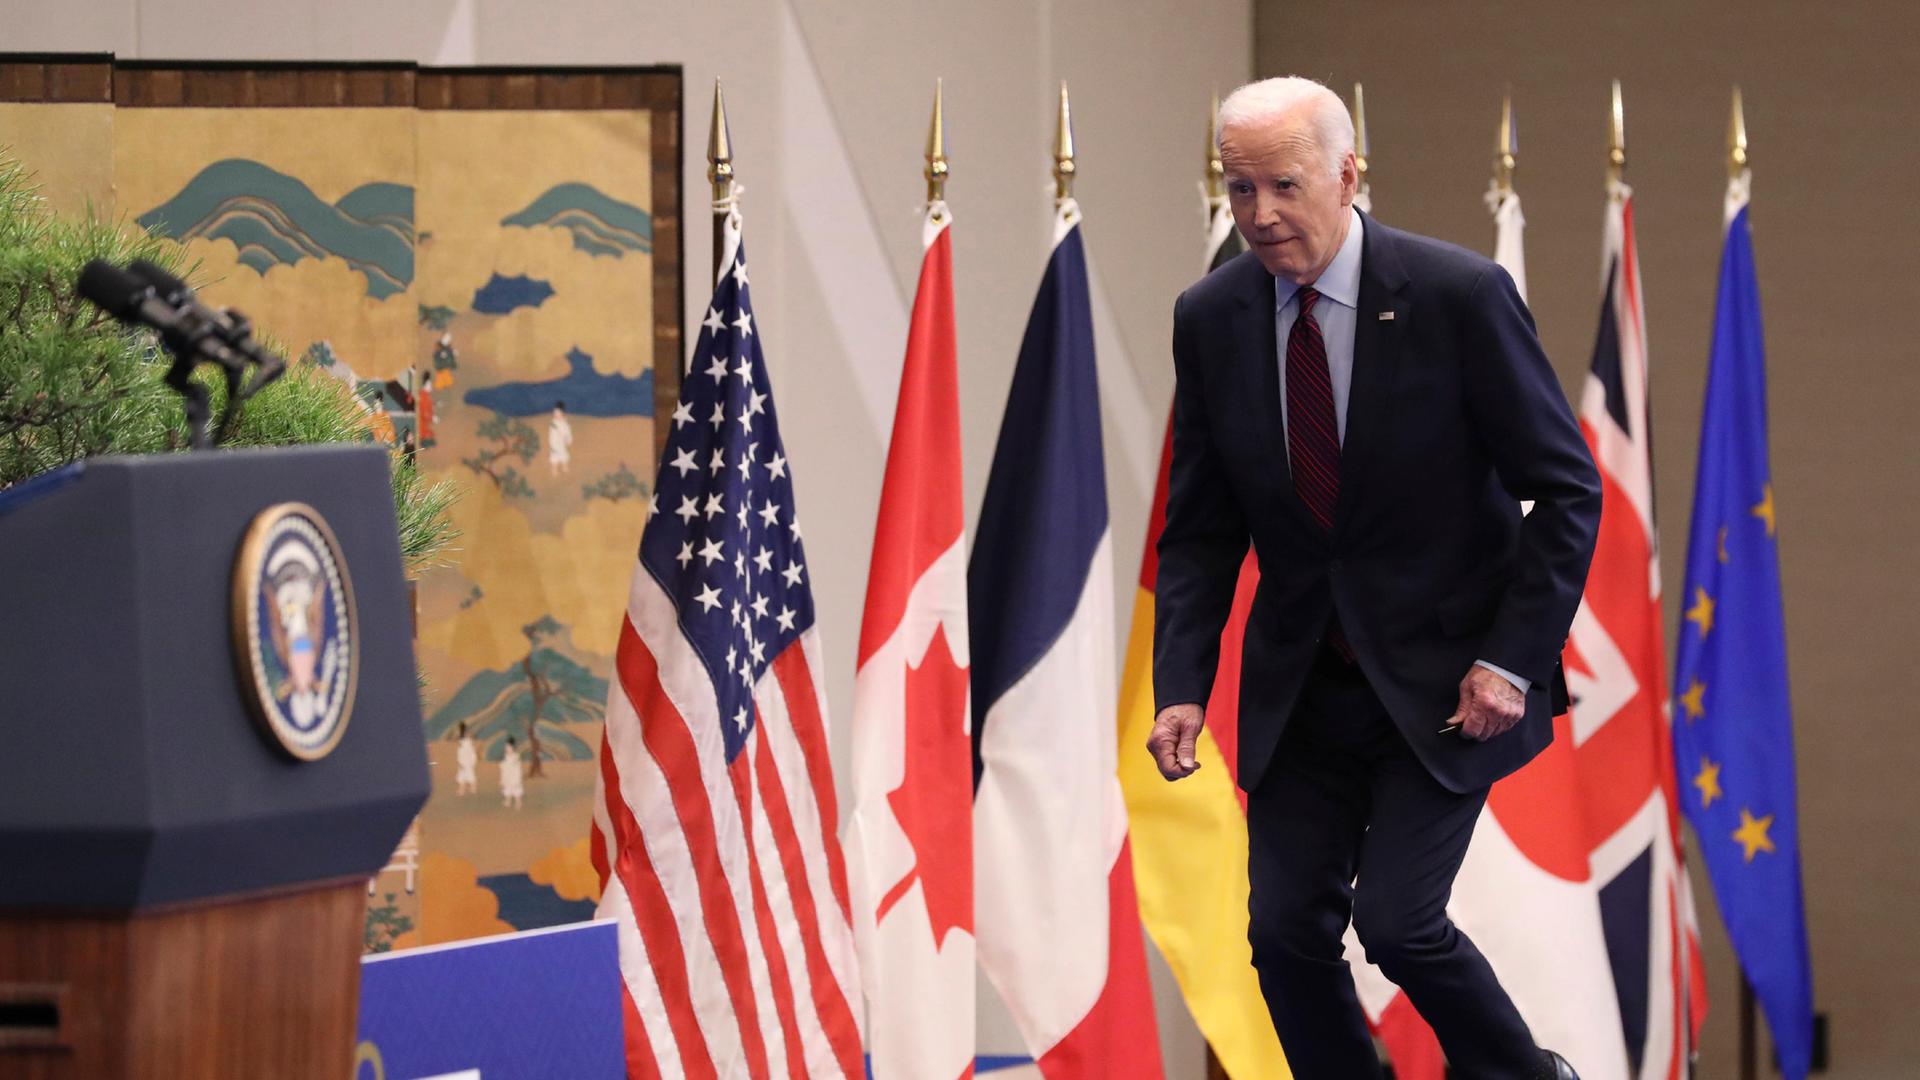 U.S. President Joe Biden speaks at a news conference after winding up a three-day G7 meeting in Hiroshima Prefecture on May 21, 2023. ( The Yomiuri Shimbun via AP Images )